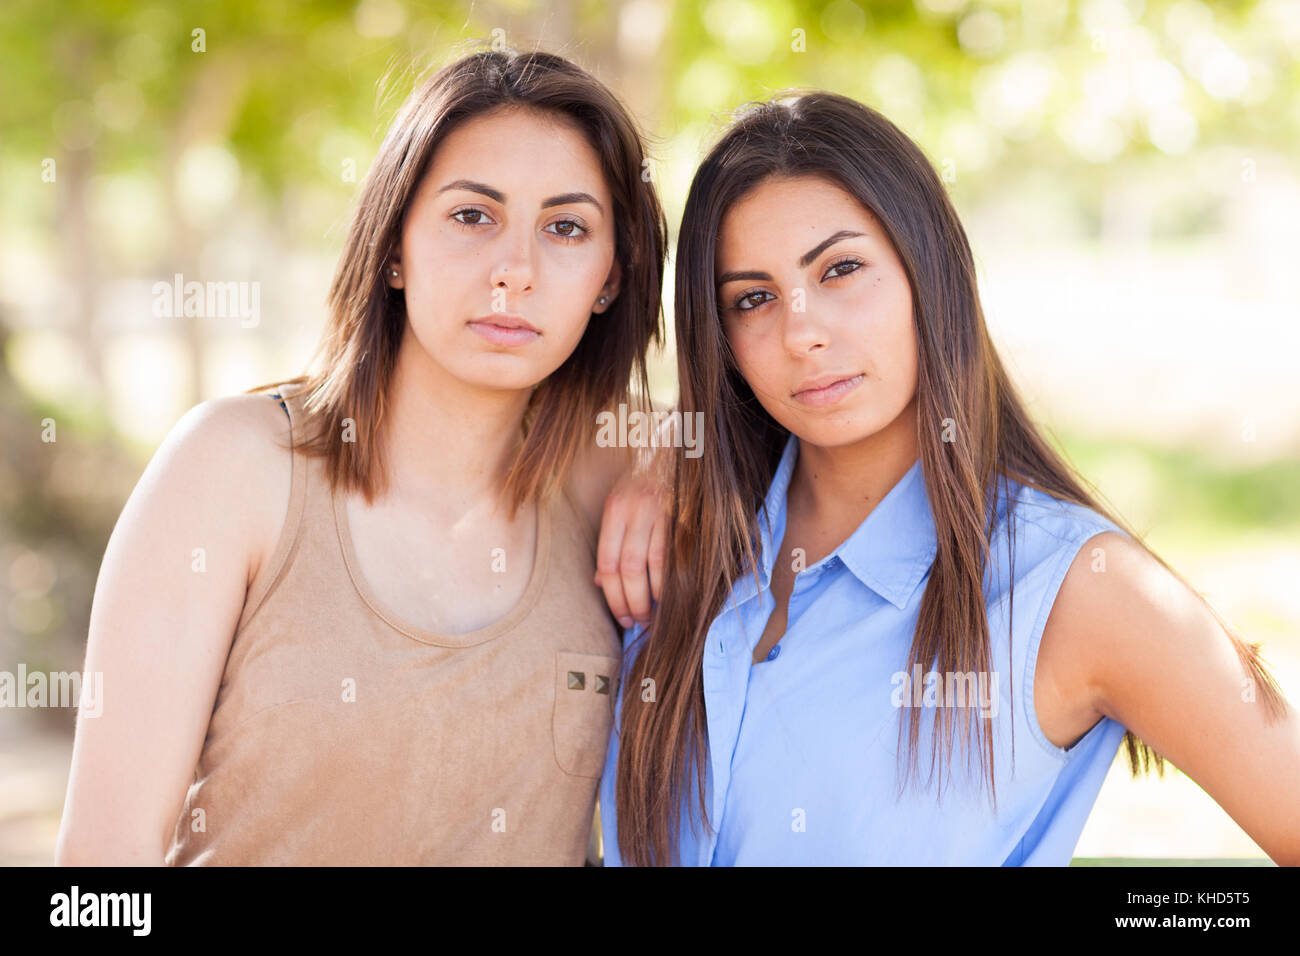 Two Beautiful Ethnic Twin Sisters Portrait Outdoors. Stock Photo